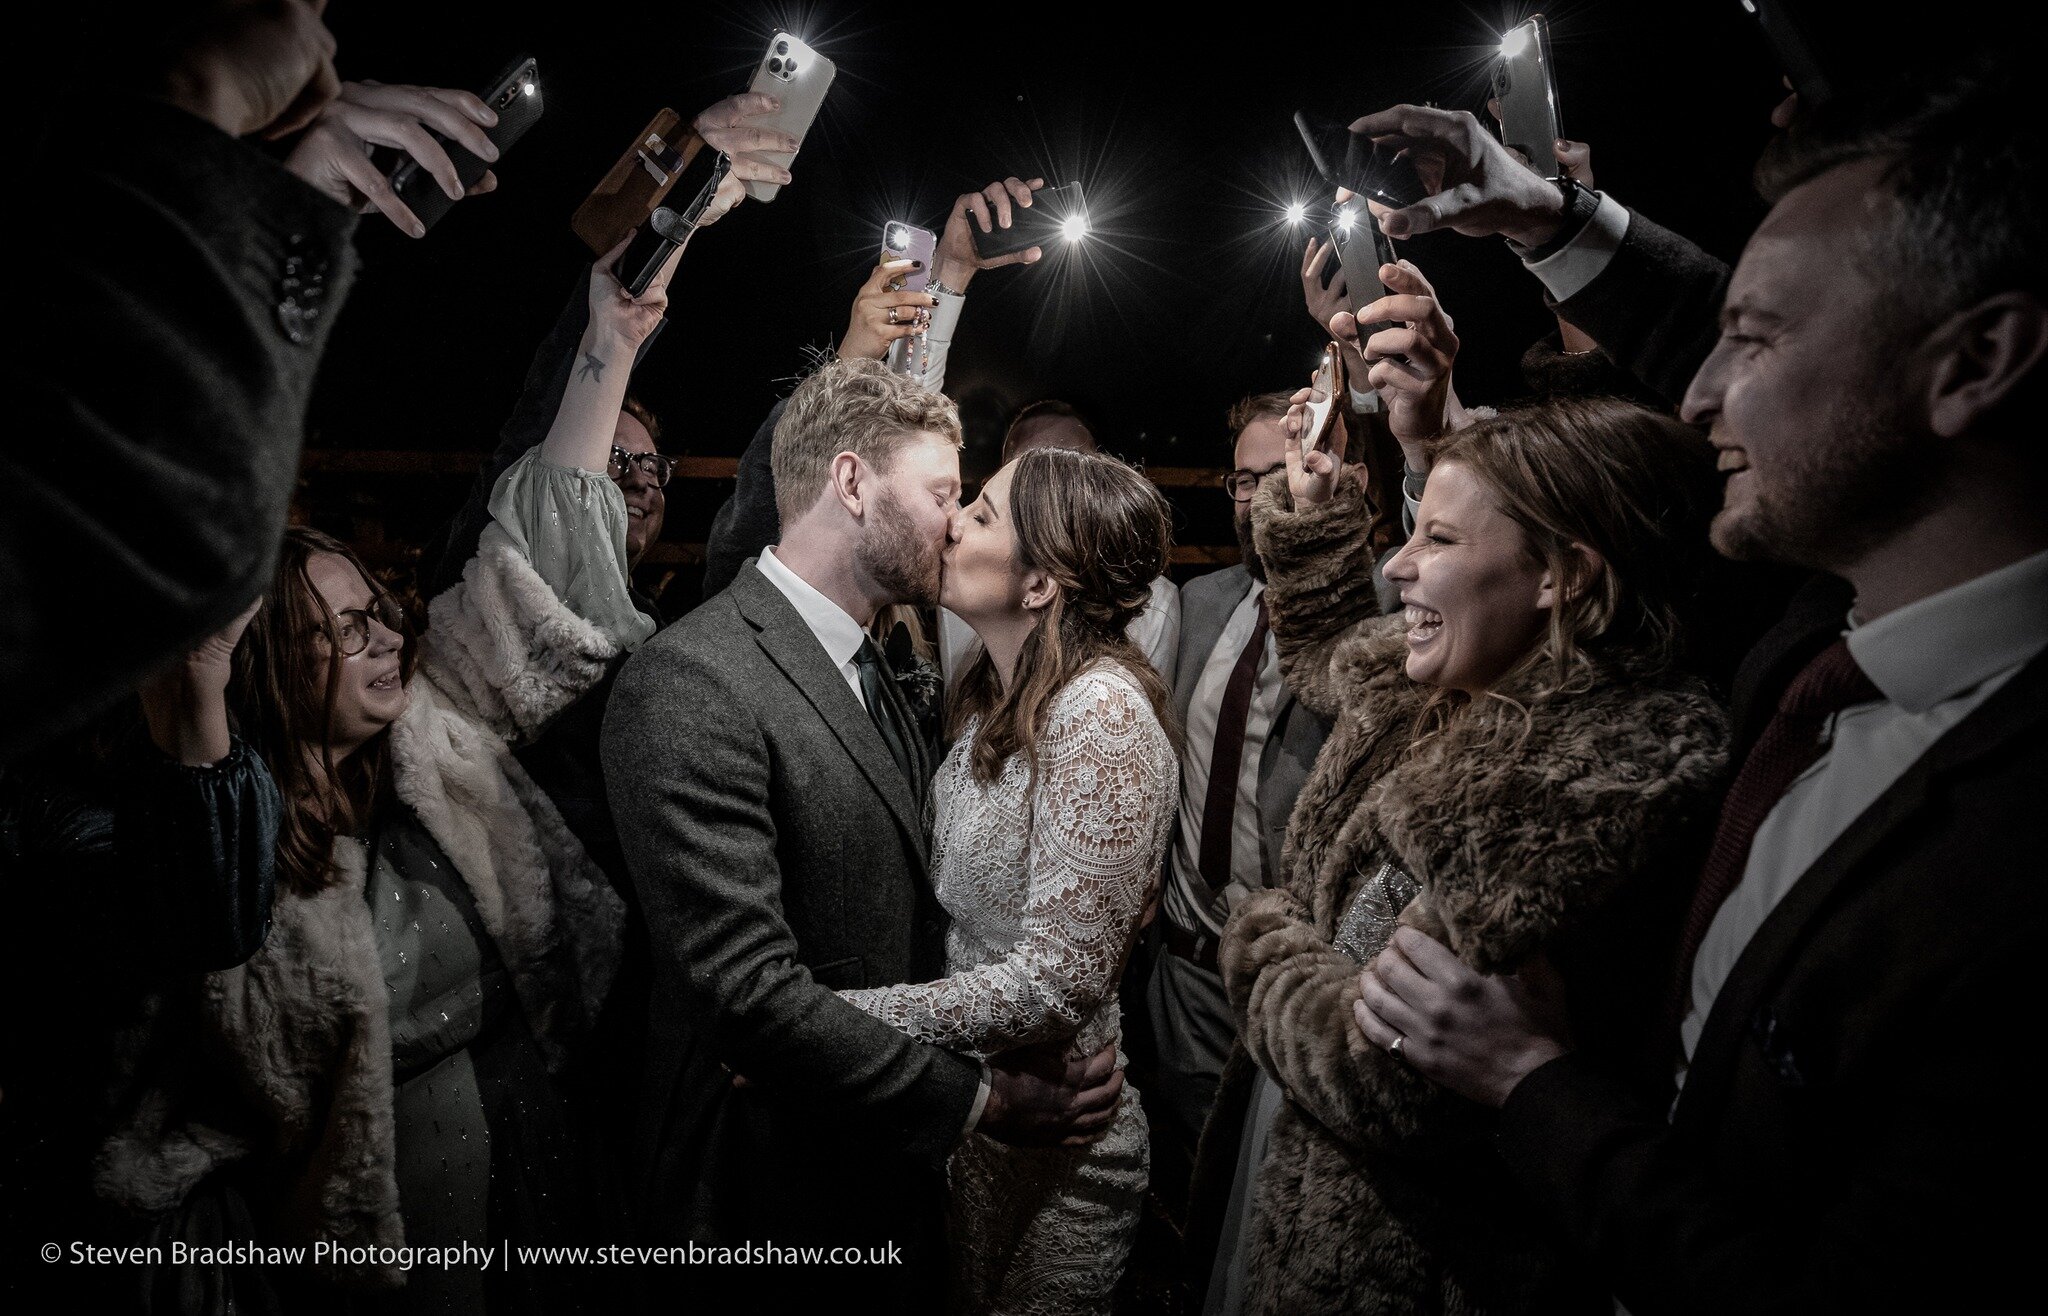 When there's no ambient light!!... Sally &amp; George illuminated by phone torches, my last picture taken in 2022! what an amazing day at The White Hart Inn - Weddings &amp; Functions in Alfreton. #lowlightphoto #lowlightphotography